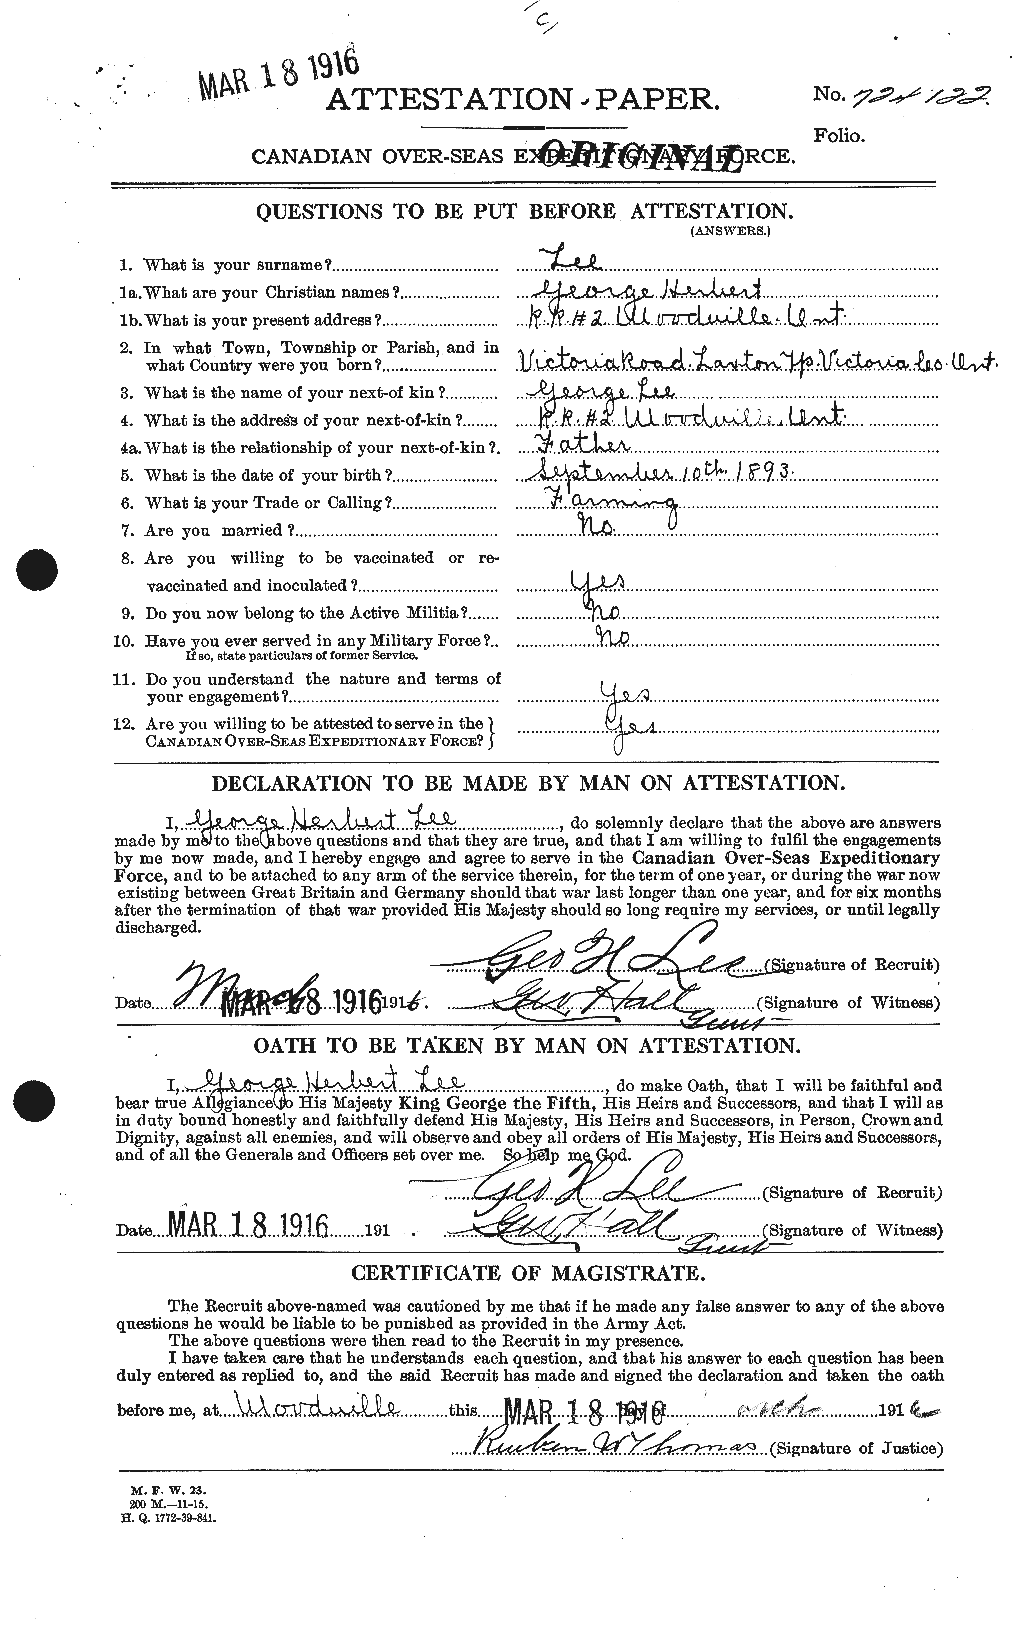 Personnel Records of the First World War - CEF 456796a